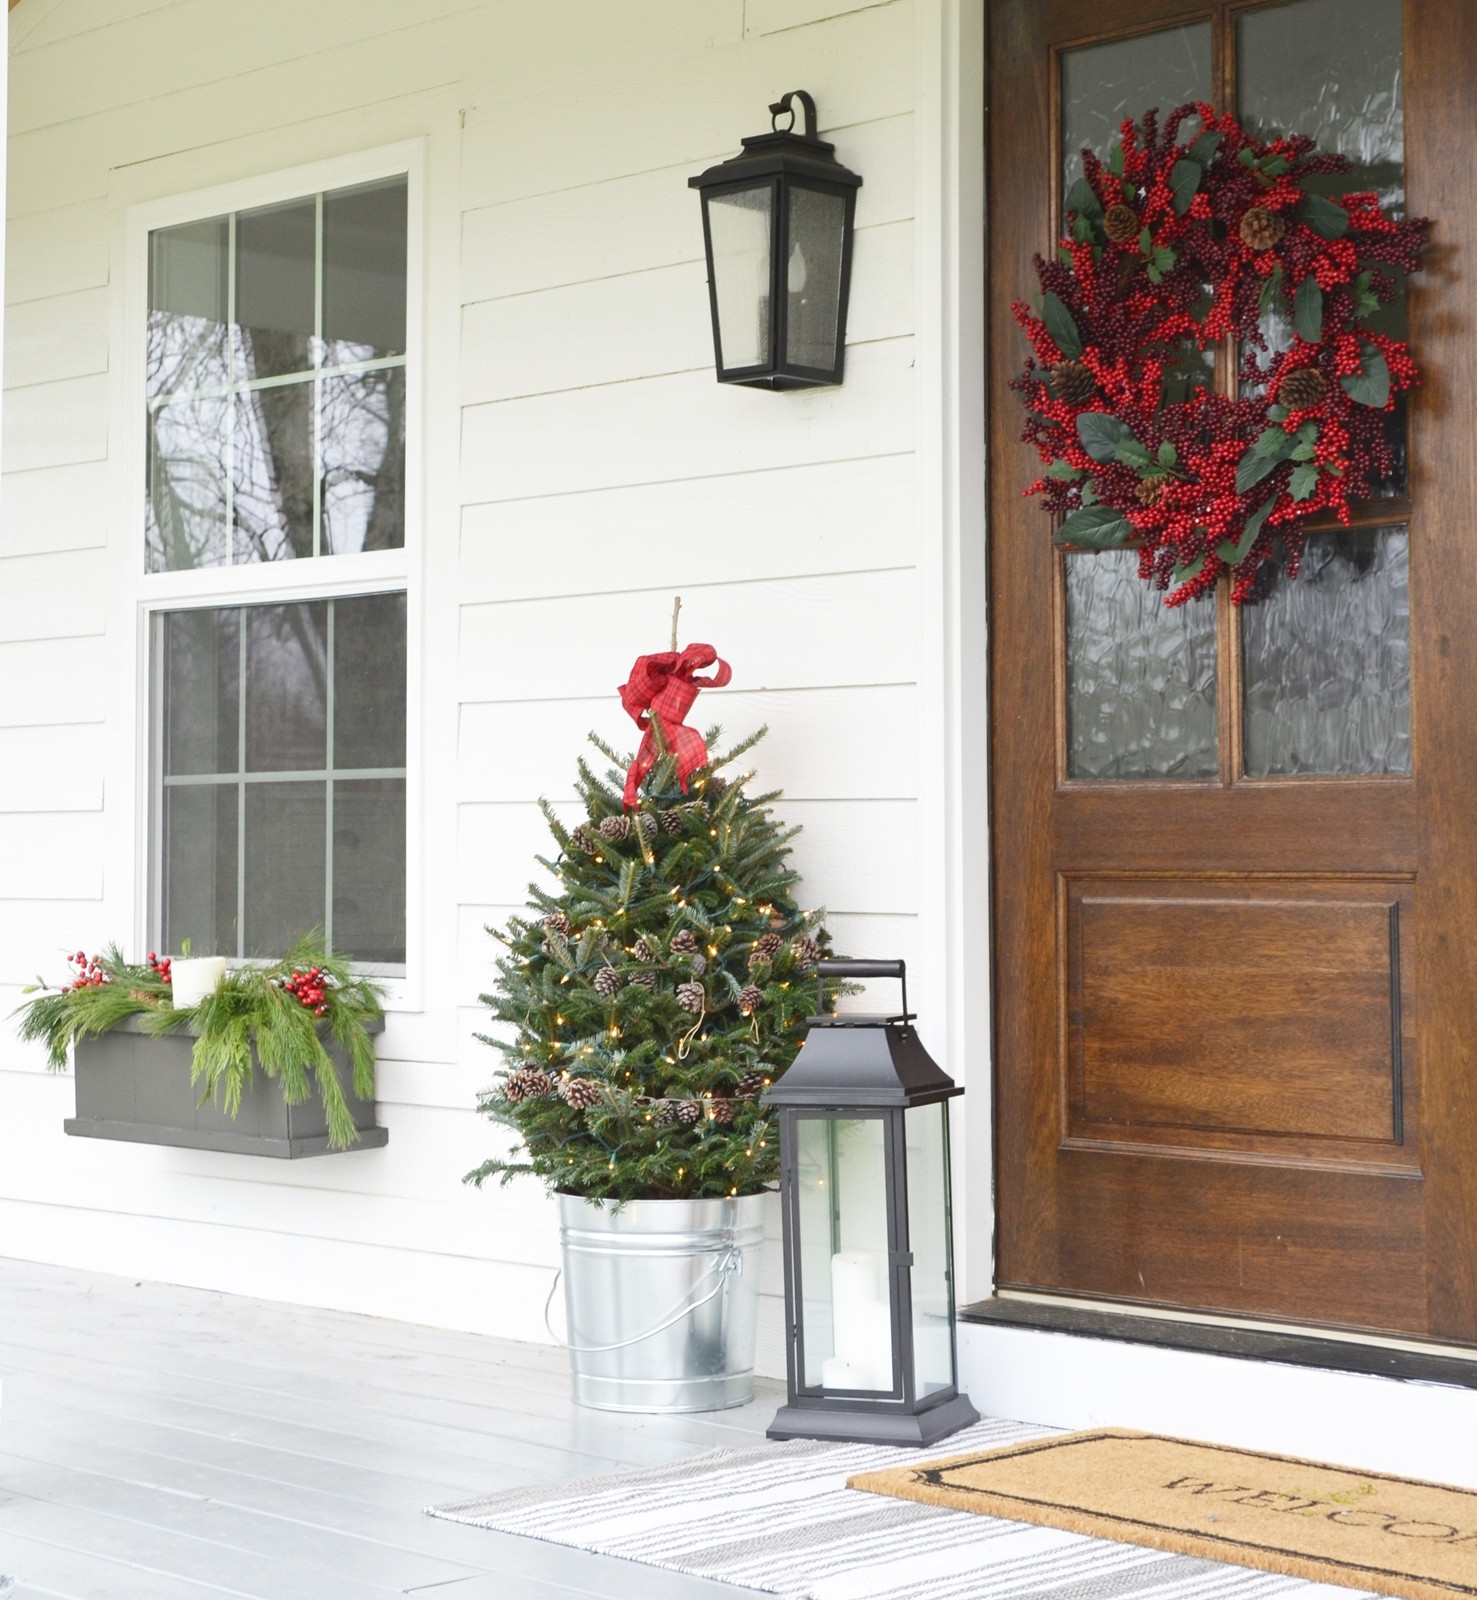 Christmas Front Porch Ideas
 Our Farmhouse Christmas Front Porch Beneath My Heart